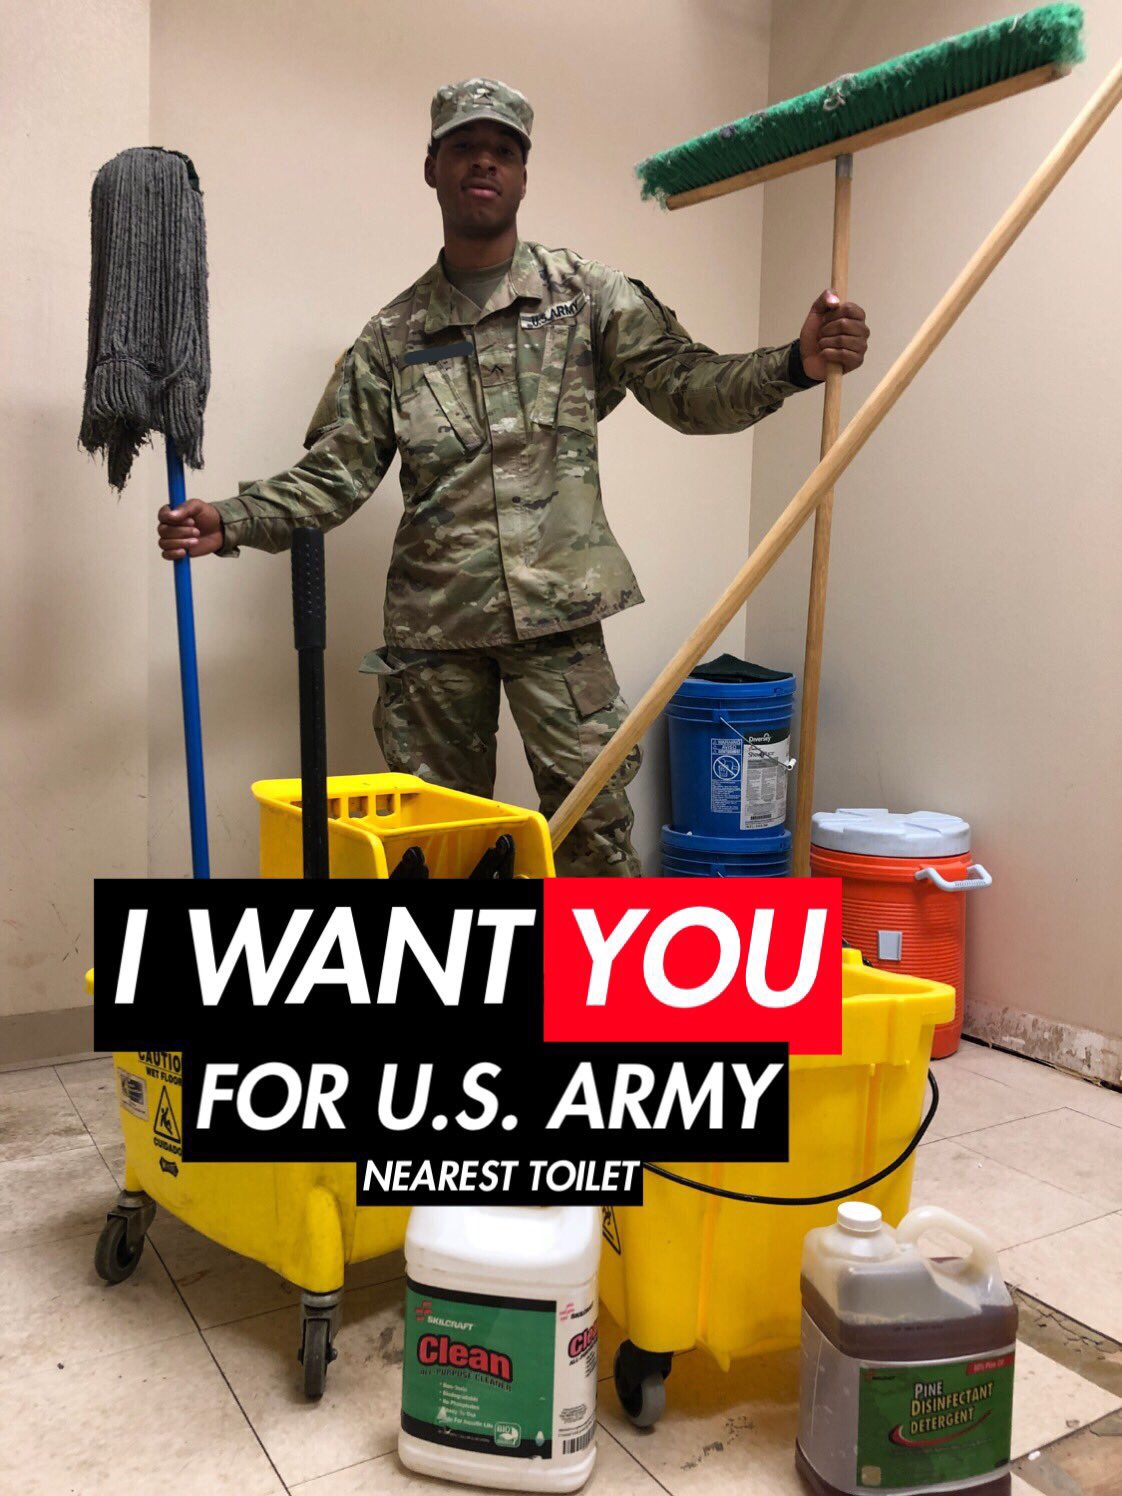 army memes toilet - I Want You Vautio For U.S. Army Nearest Toilet Skkout Clean Selen Pine Disinfectany Detergent